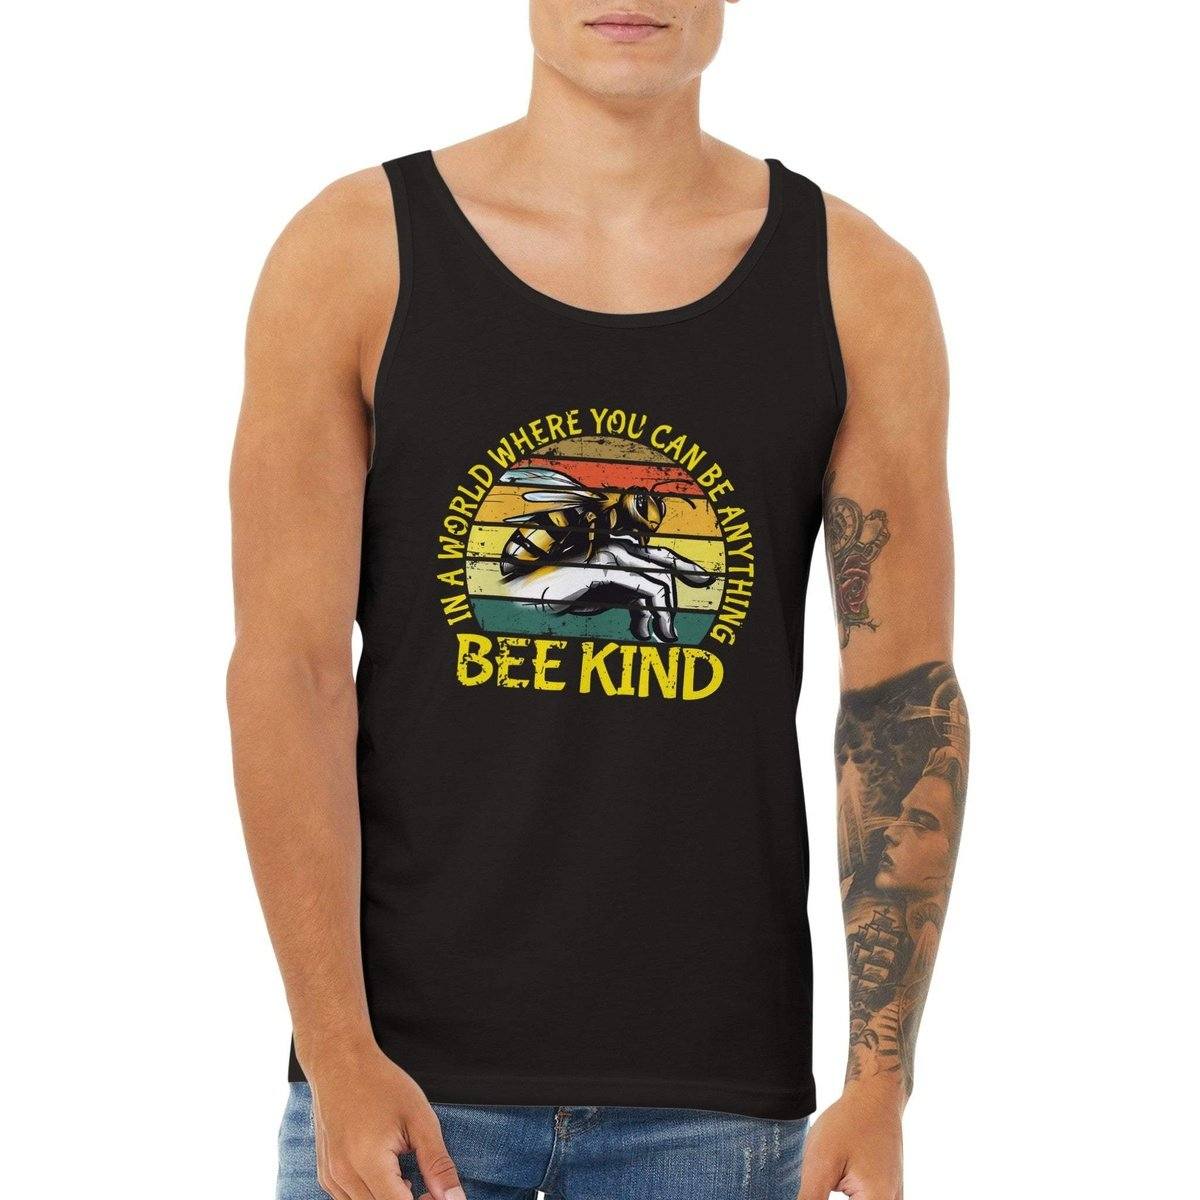 In a world where you can be anything bee kind Tank Top - Retro Vintage Bee - Premium Unisex Tank Top Australia Online Color Black / XS